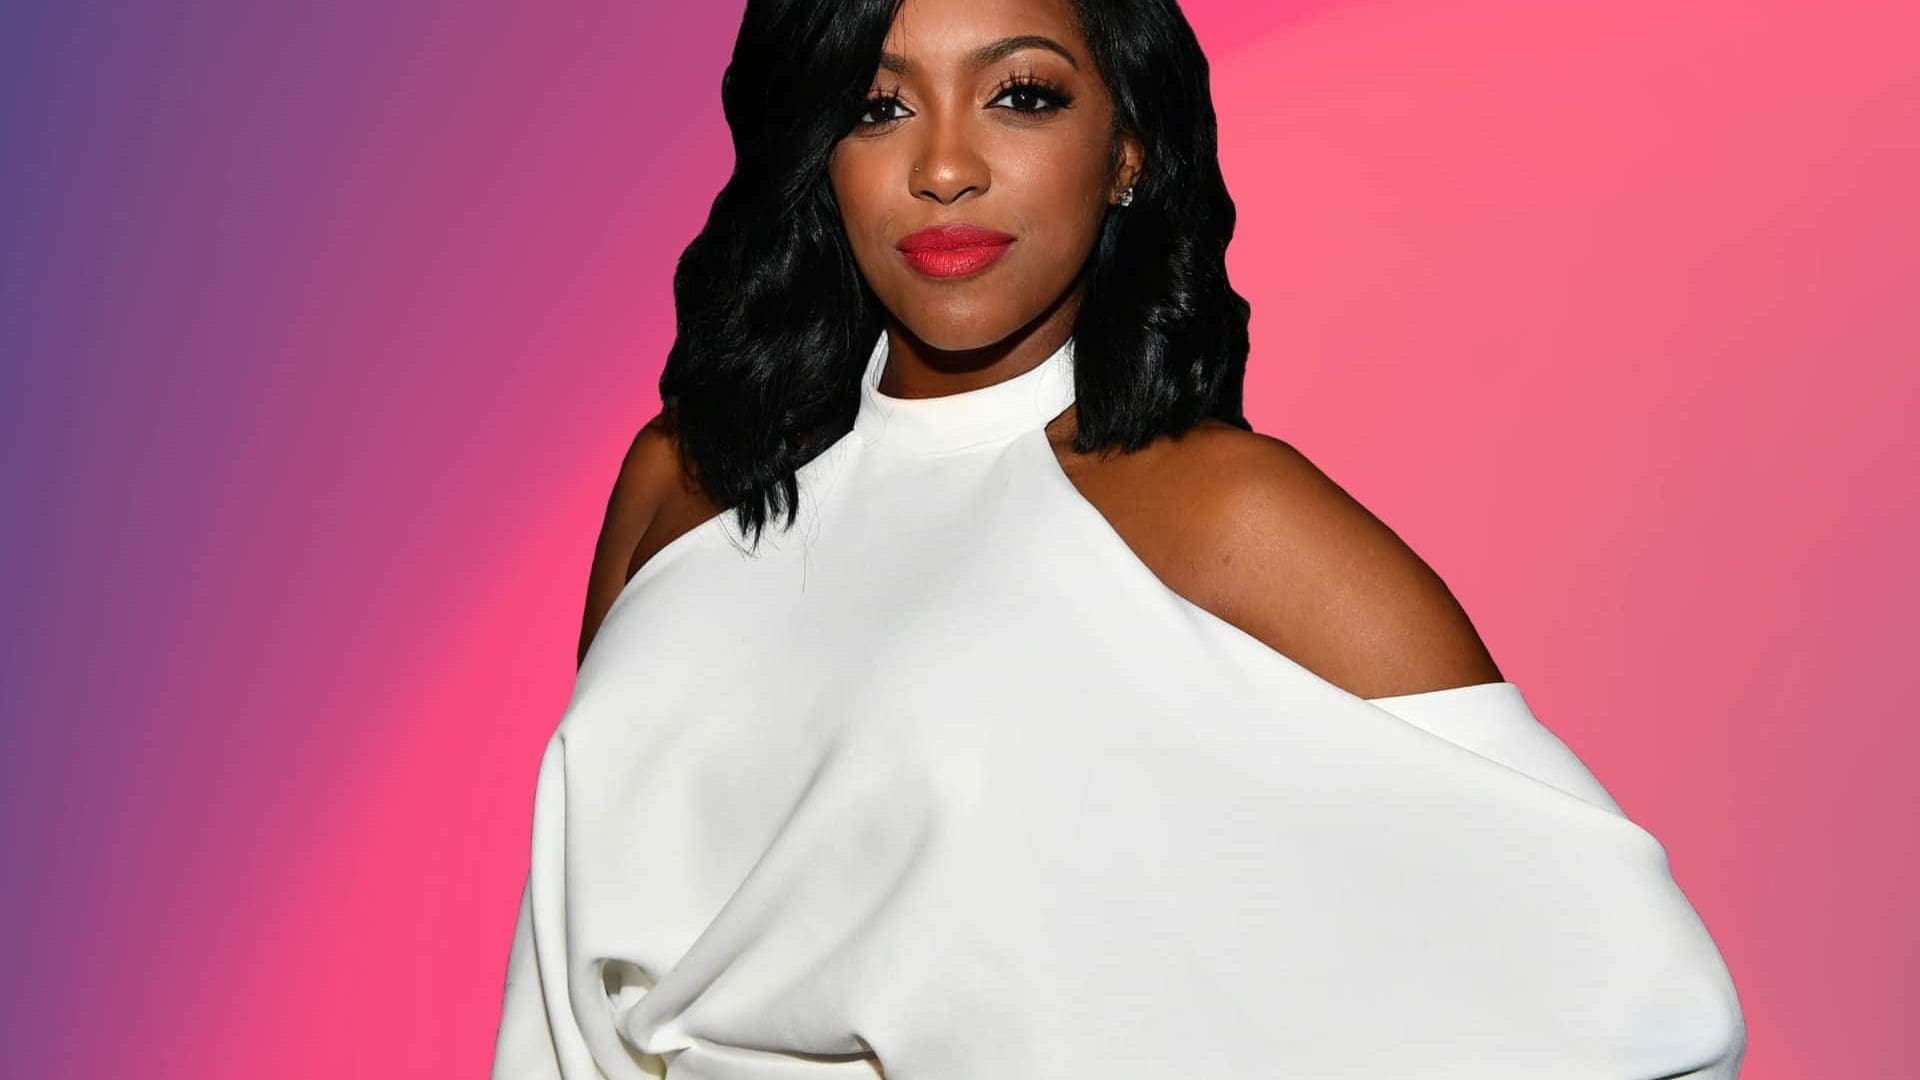 Porsha Williams Celebrates Her Mom For Mother's Day - See Her Emotional Post